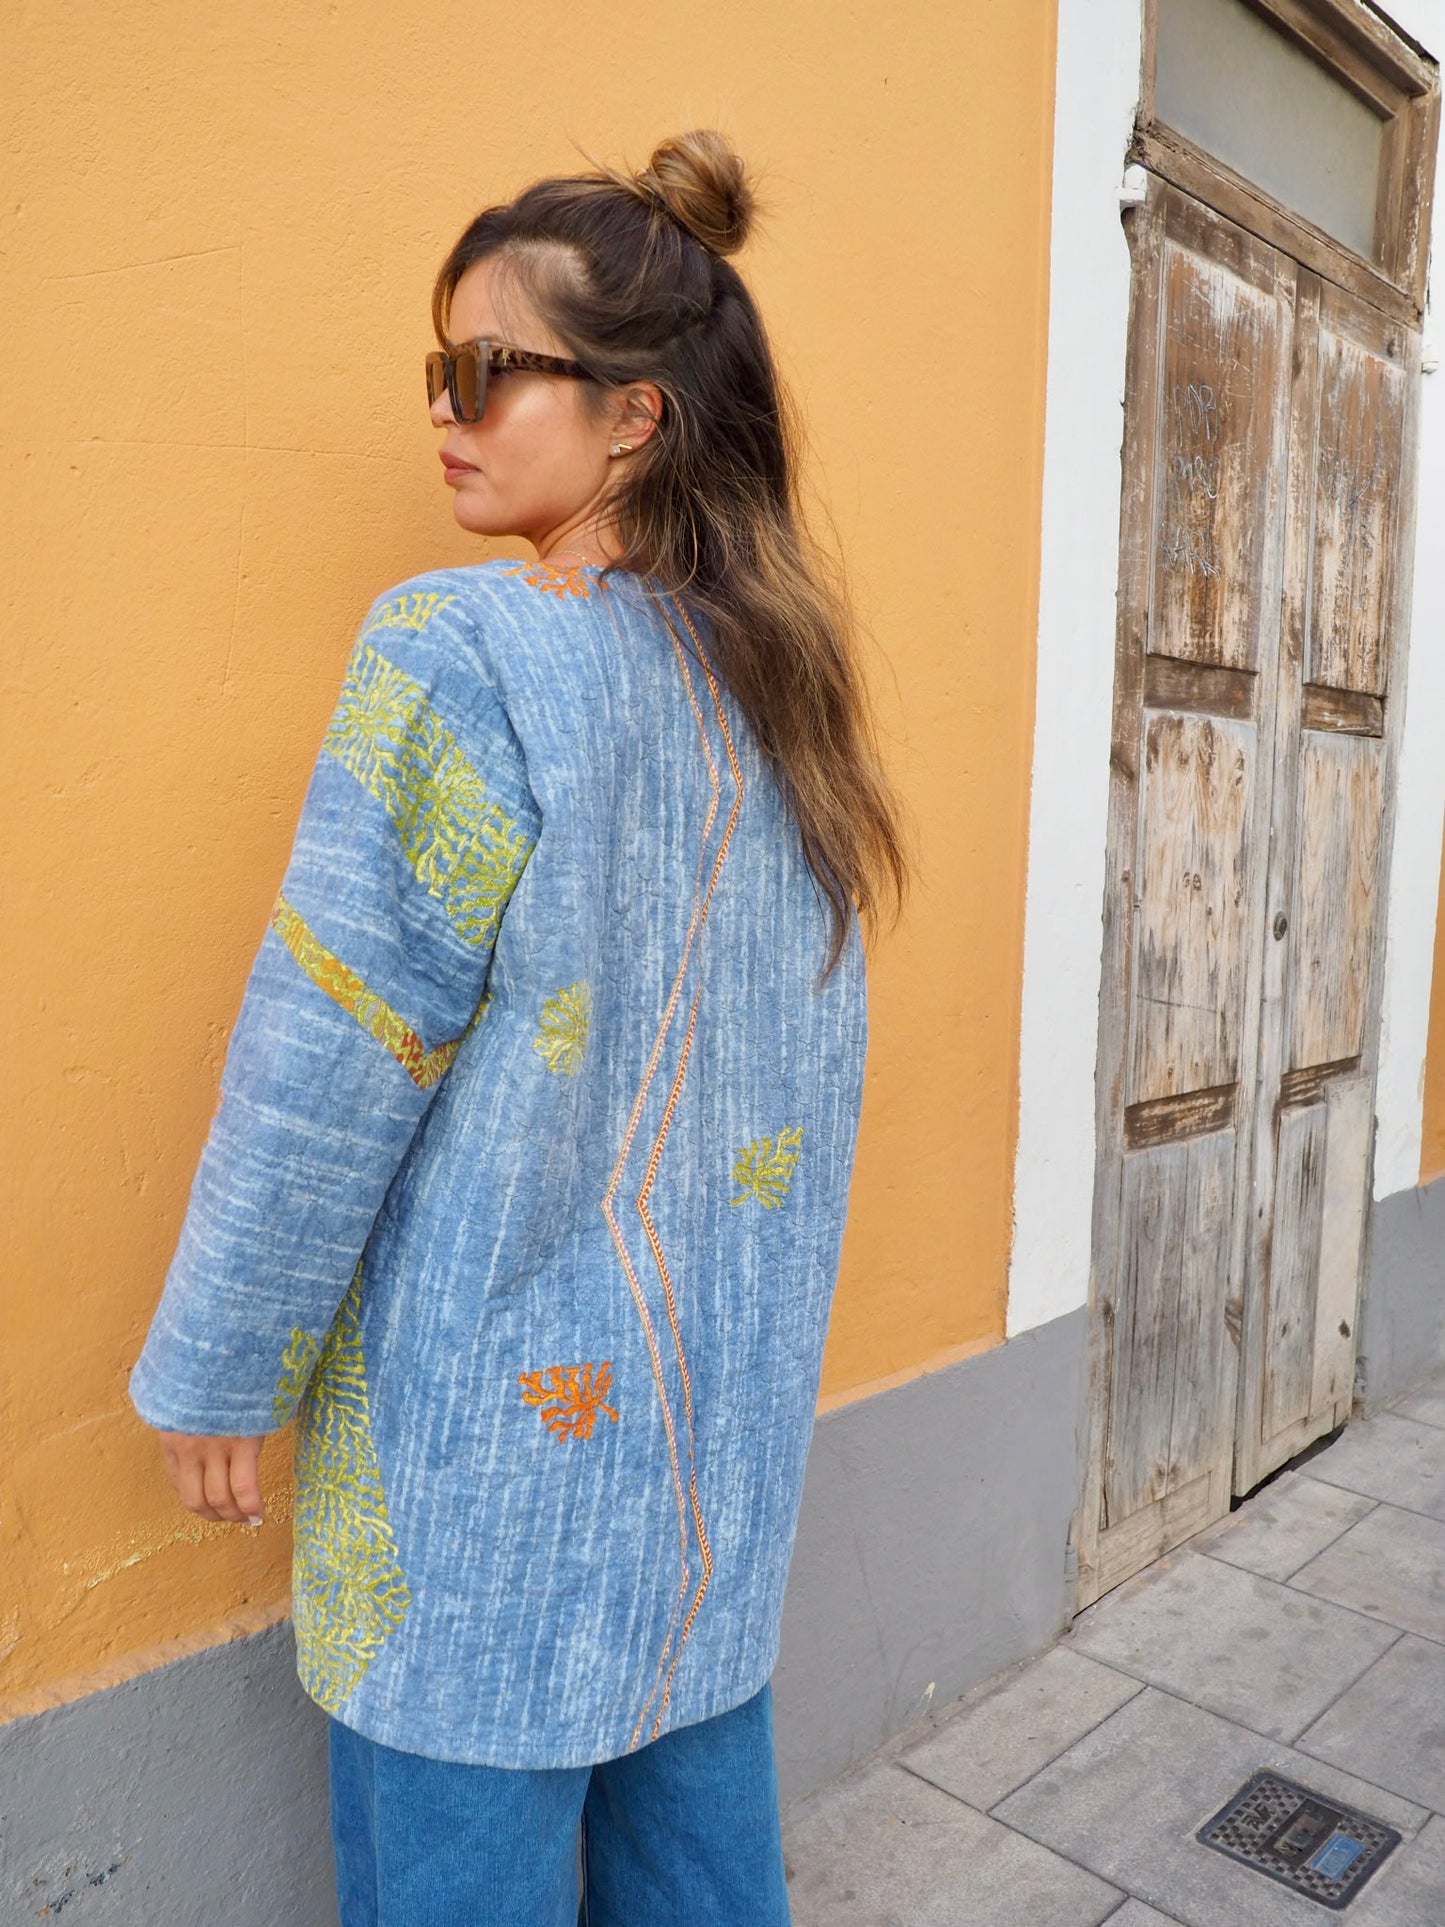 Vintage quilted blue patterned blanket jacket up-cycled by Vagabond Ibiza